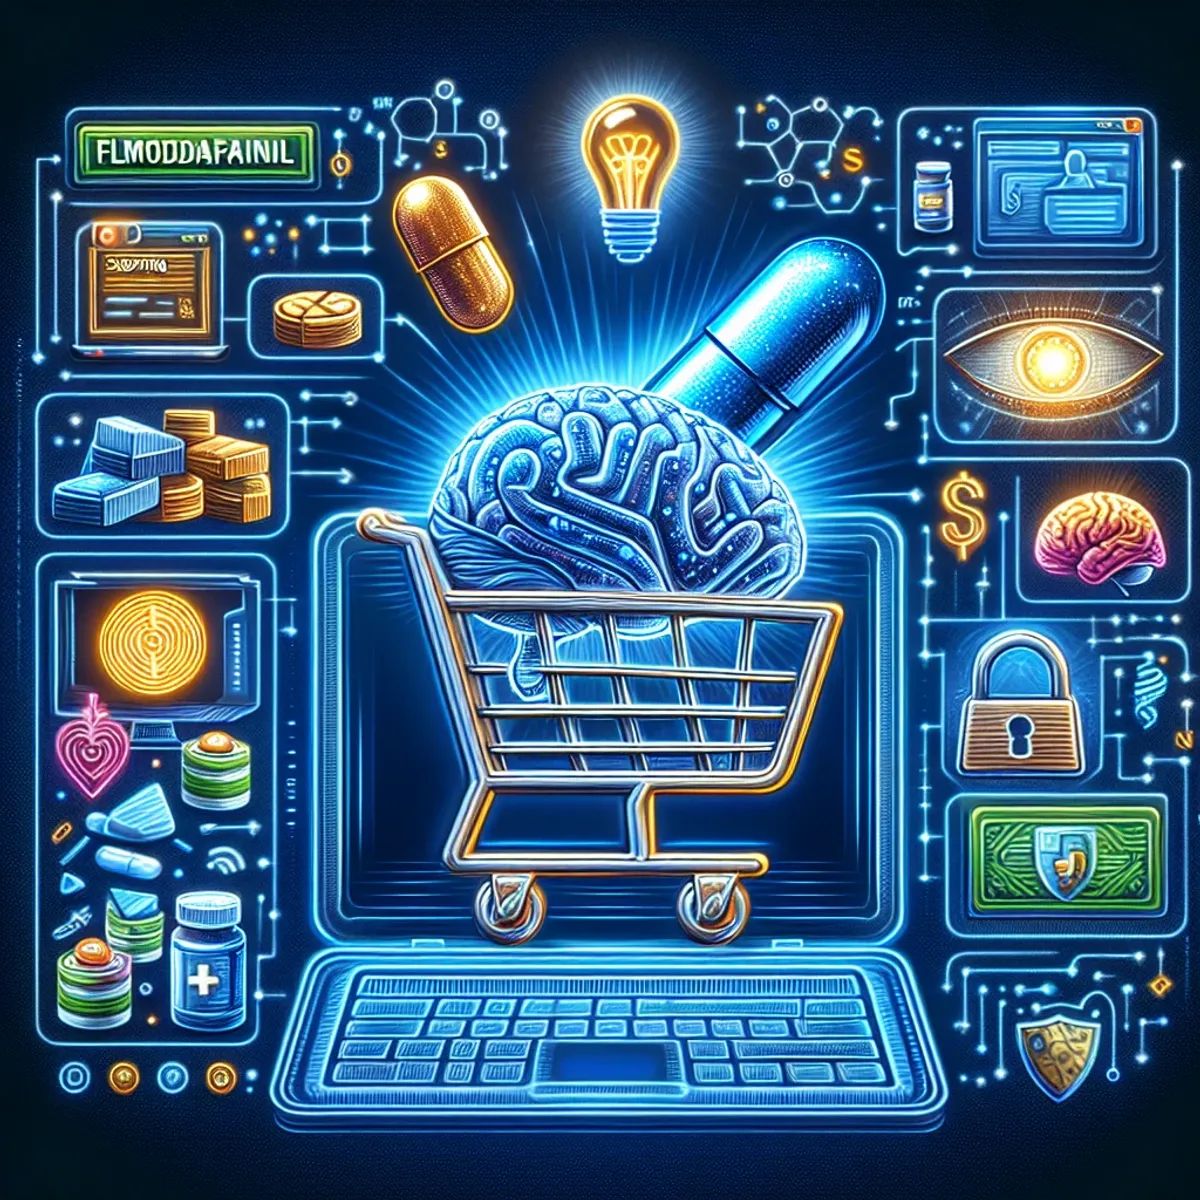 An image of a computer screen displaying a shopping cart with a capsule-like representation of Flmodafinil inside it. There is a brain glowing with energy or light, along with internet symbols and indications of a secured, private transaction. The colors are vibrant and visually engaging.